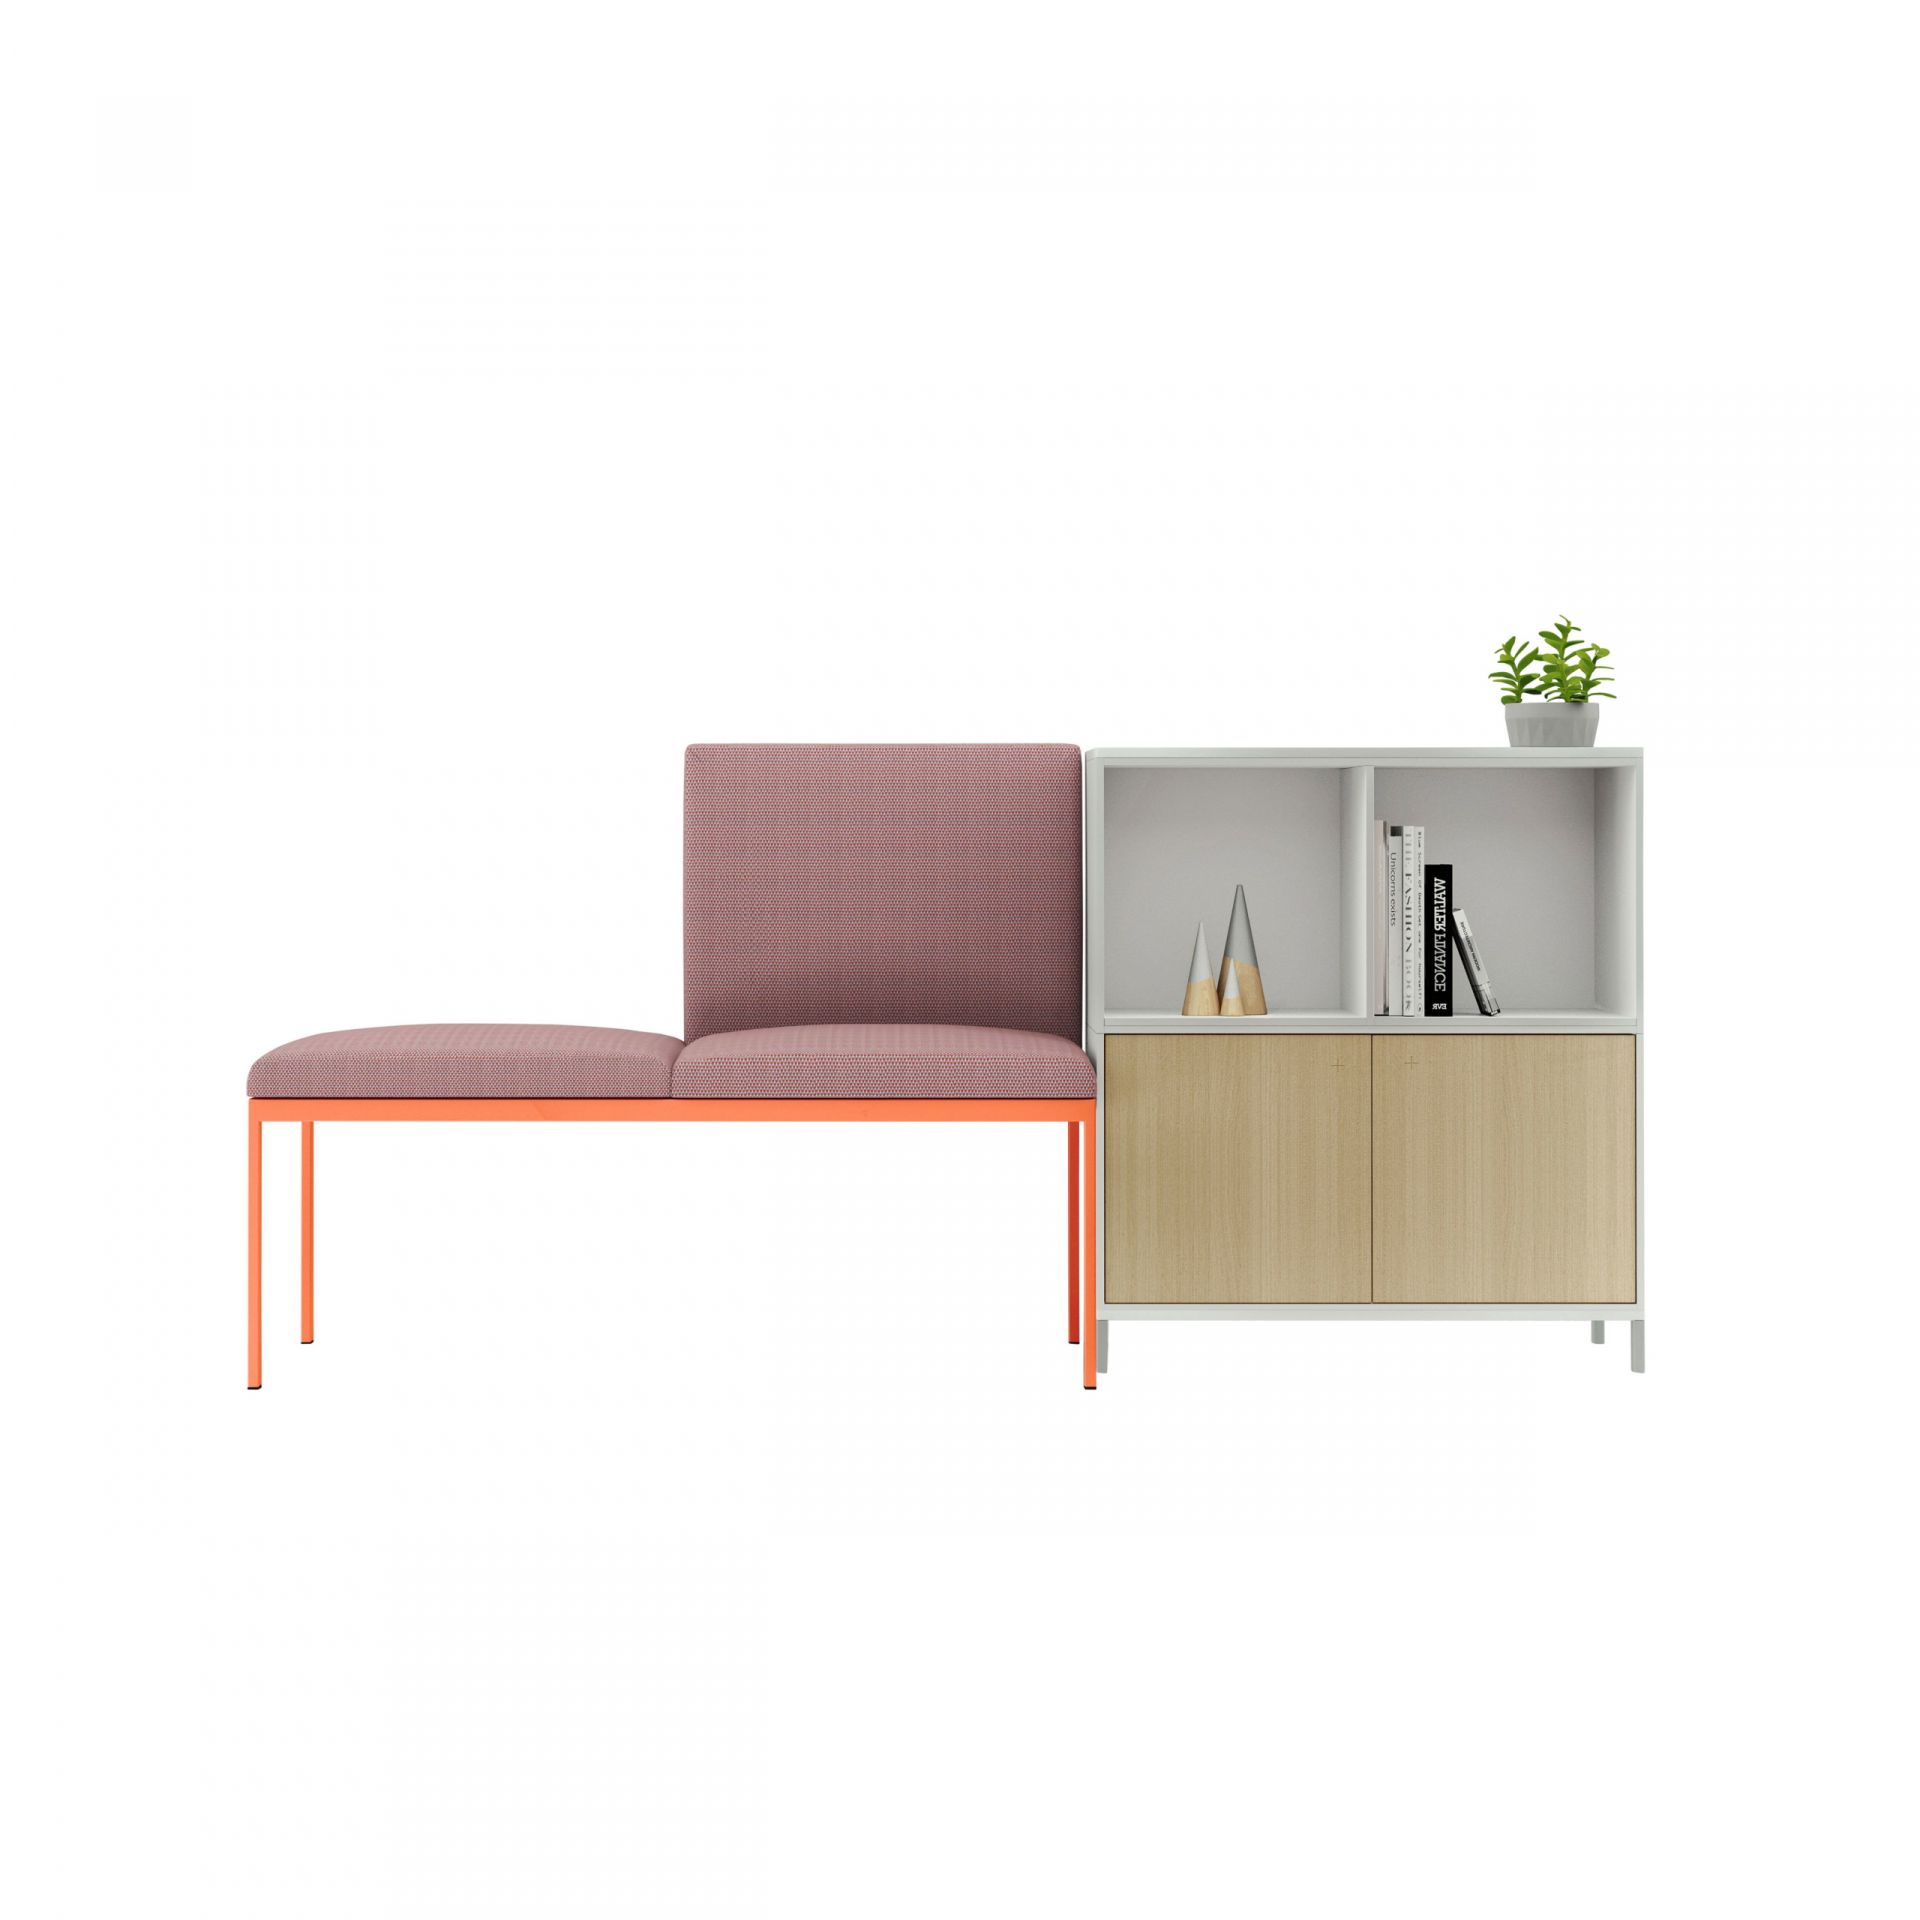 Create Seating Sofa and storage product image 1